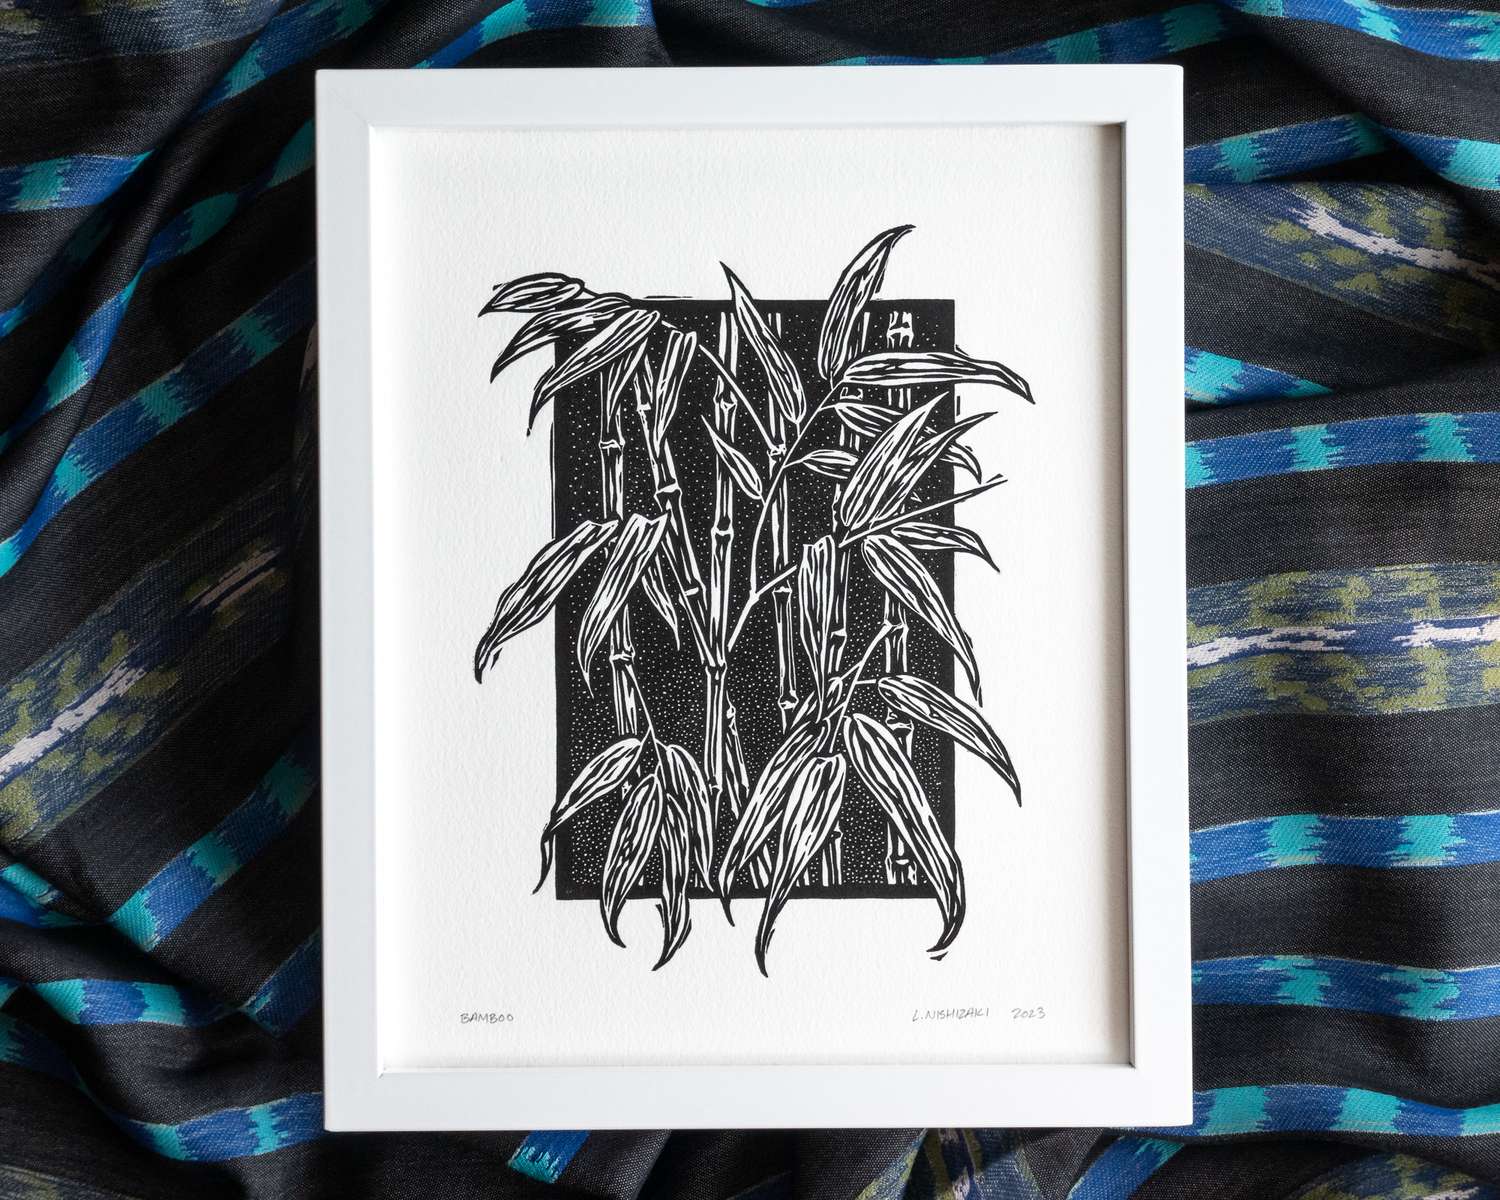 A black and white blockprint of bamboo, printed on white paper and framed in a white wood frame. The frame sits on rumpled blue and black striped fabric.